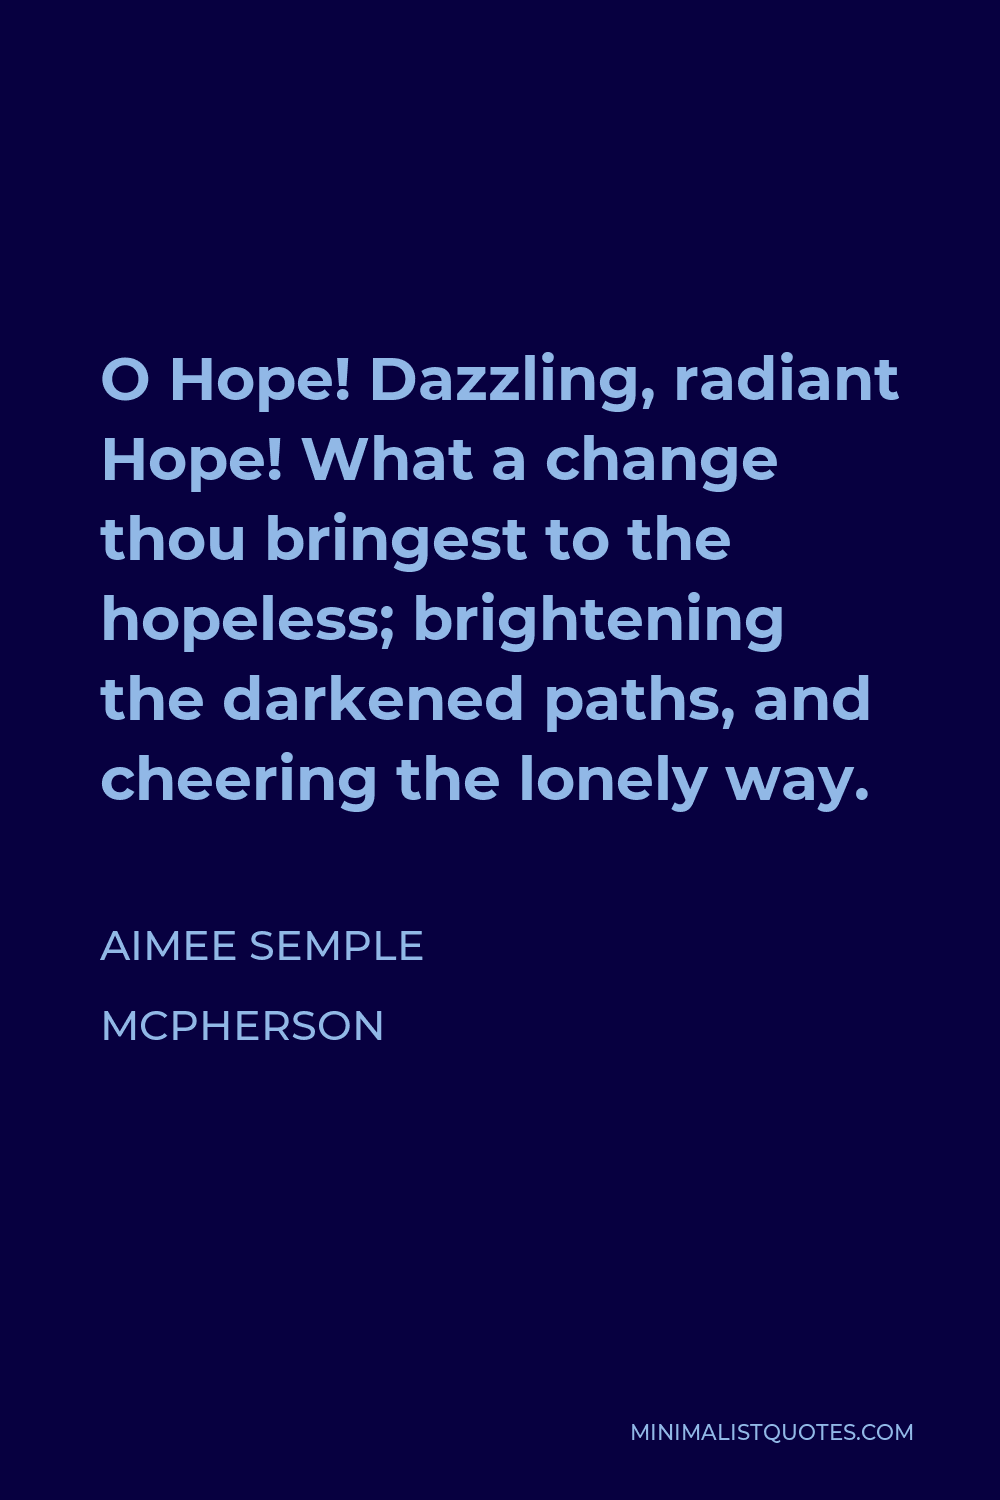 Aimee Semple McPherson Quote - O Hope! Dazzling, radiant Hope! What a change thou bringest to the hopeless; brightening the darkened paths, and cheering the lonely way.